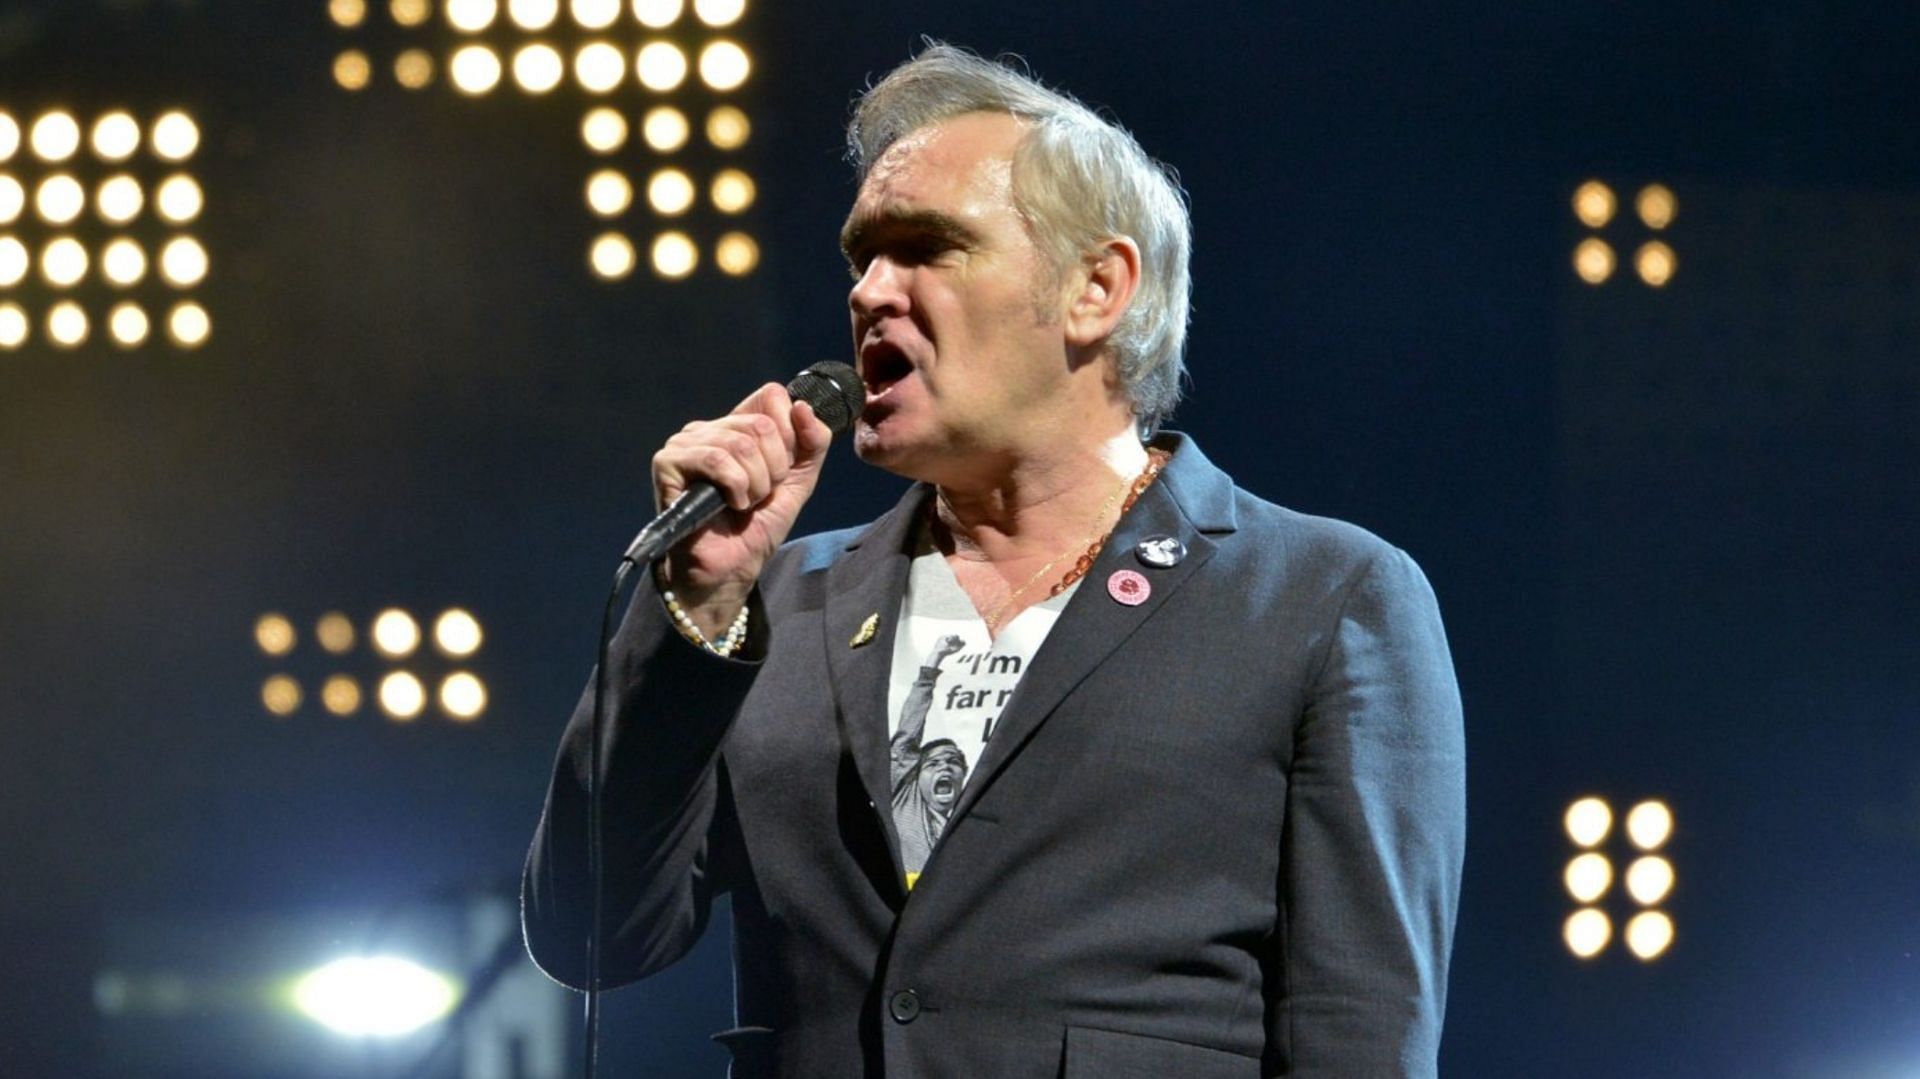 Morrissey cancelled his LA show after performing for 30 minutes. (Image via Jim Dyson / Getty)